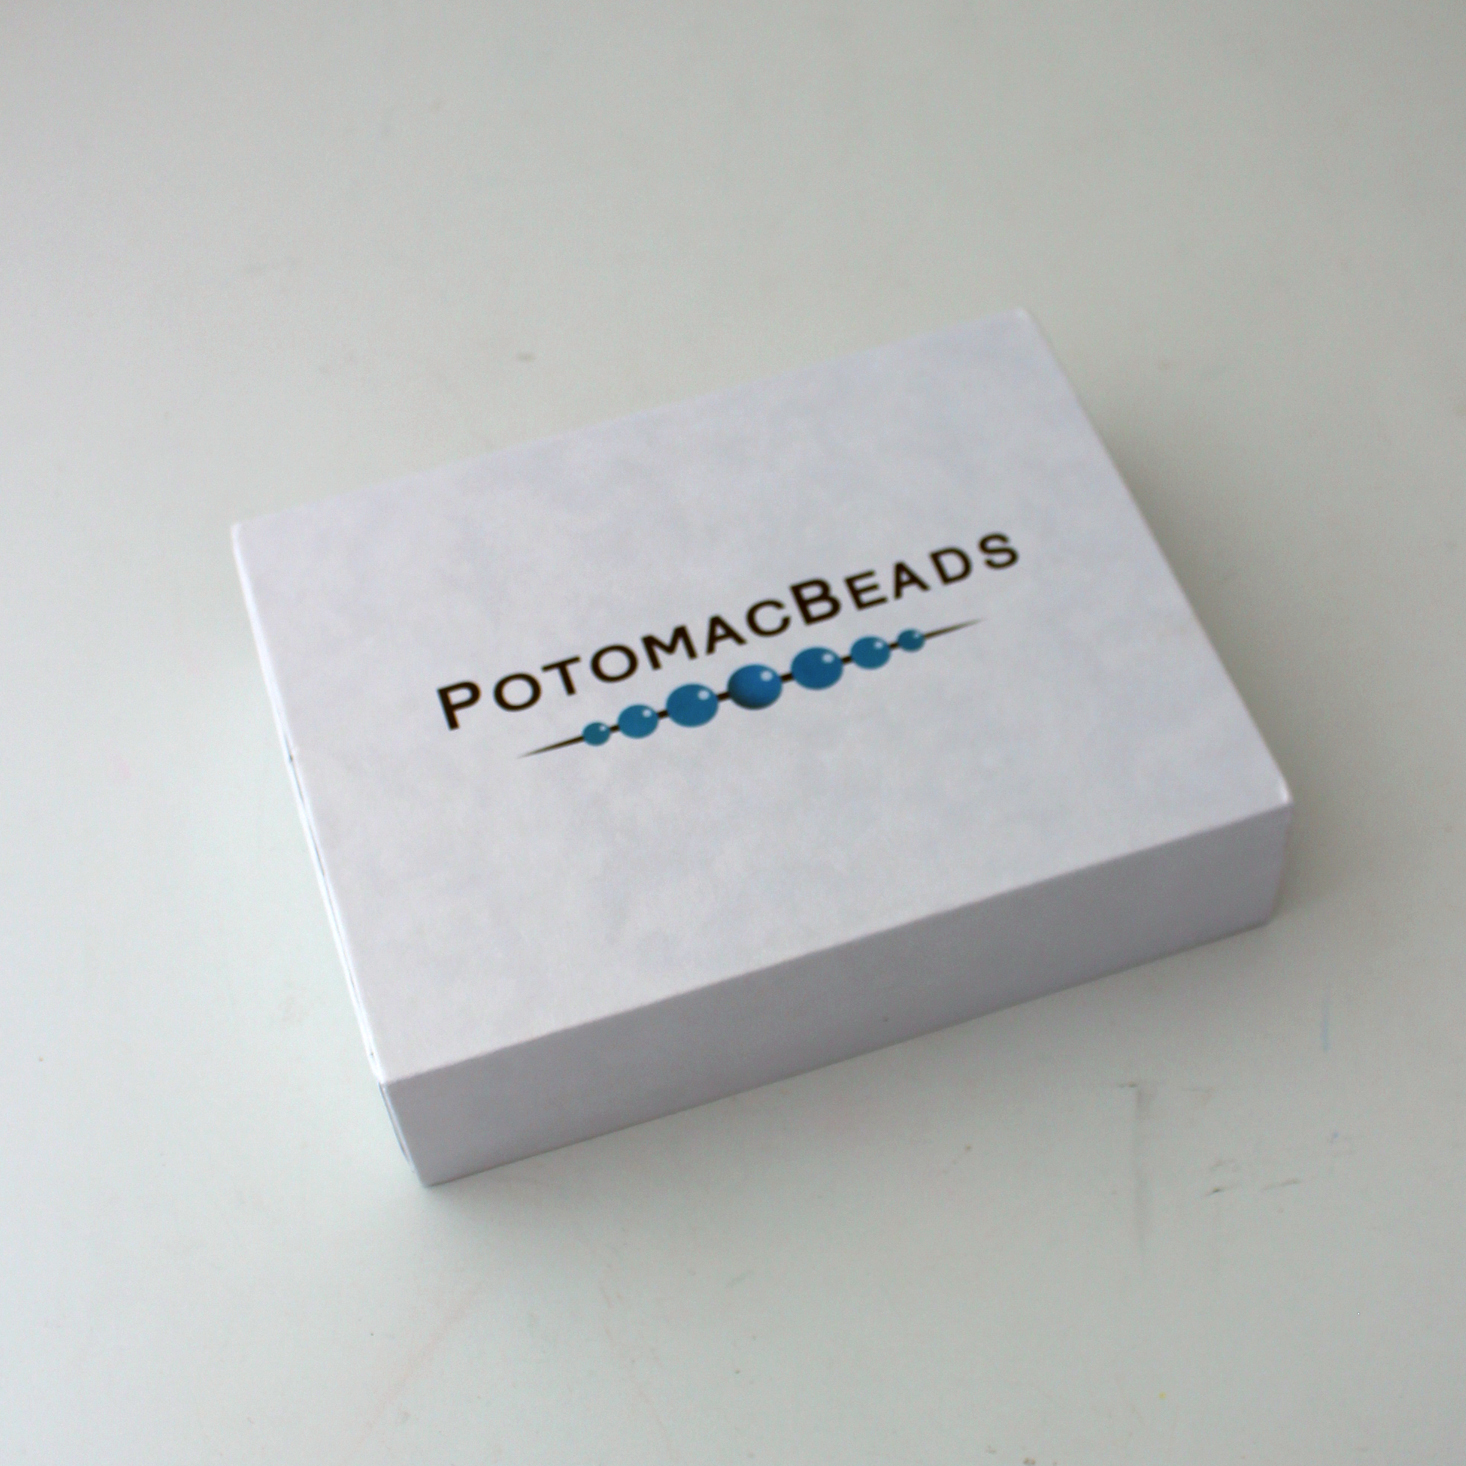 PotomacBeads Best Bead Box Review – October 2019